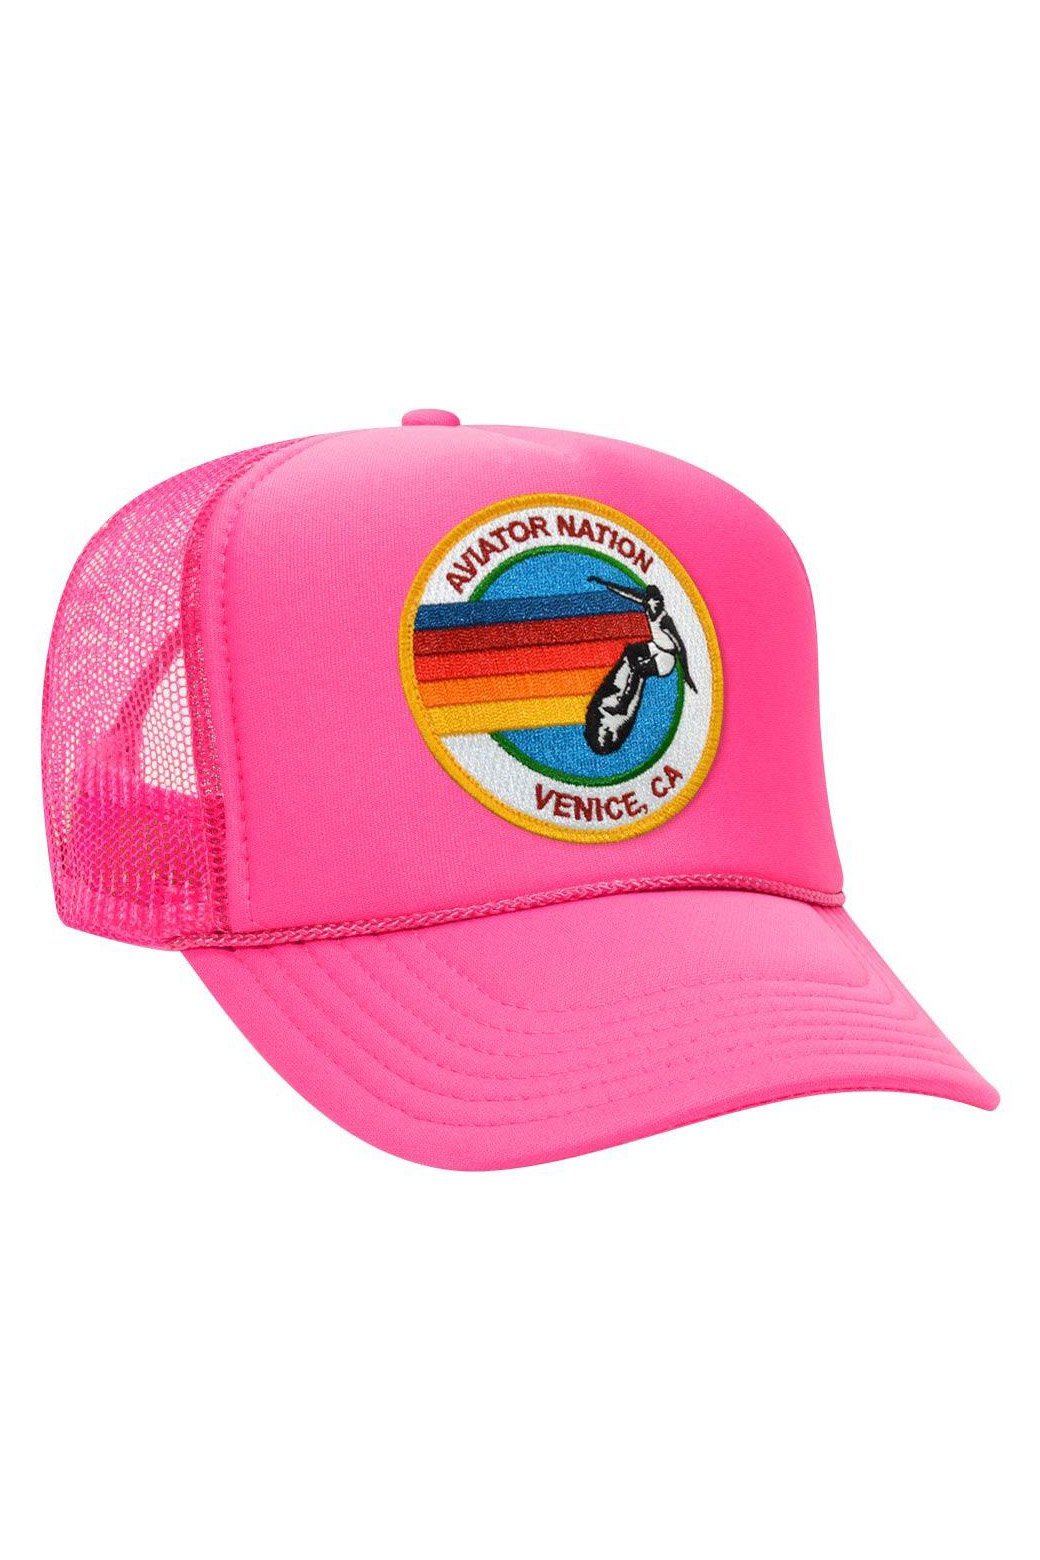 Buy Country Trucker Hats Online In India -  India